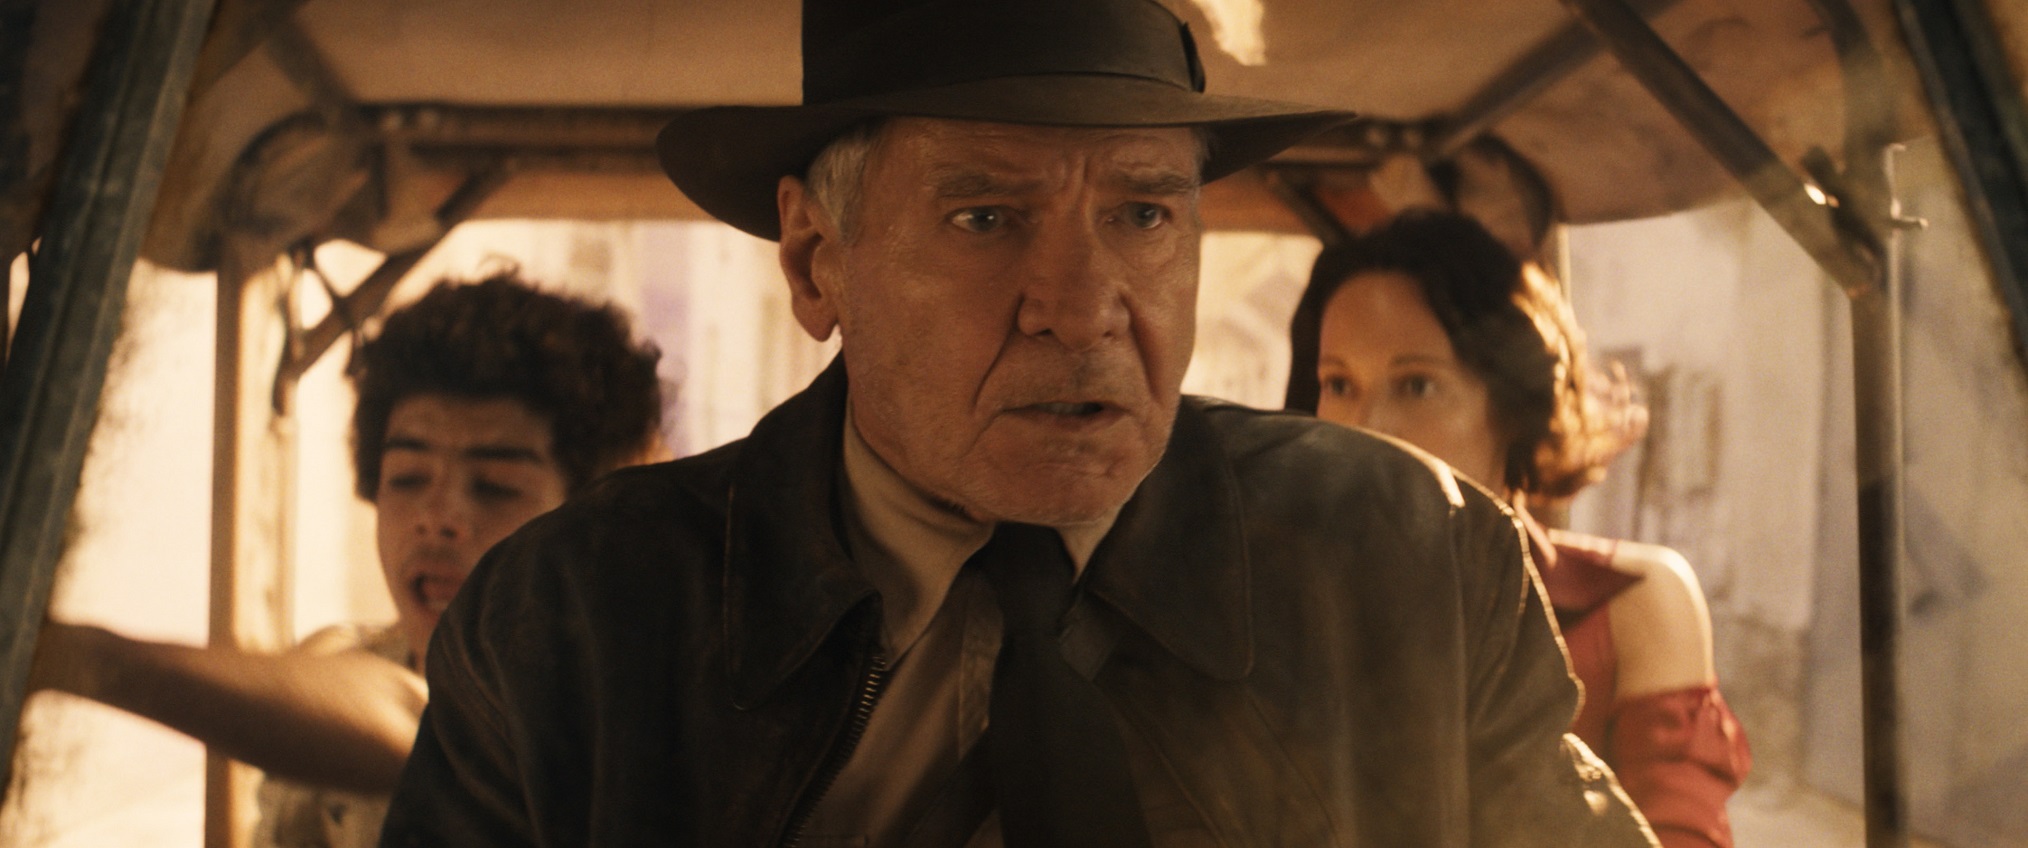 (L-R): Teddy (Ethann Isidore), Indiana Jones (Harrison Ford) and Helena (Phoebe Waller-Bridge) in Lucasfilm's INDIANA JONES AND THE DIAL OF DESTINY